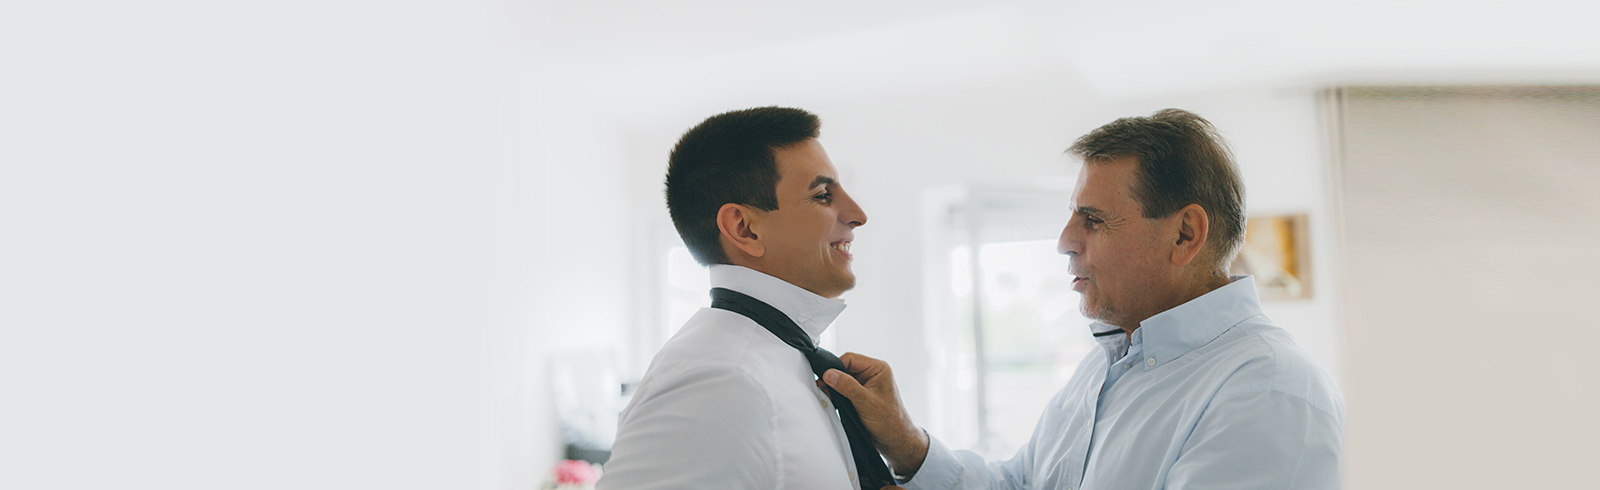 elder father proudly adjusting his son's tie as they both look happy and smiling at each other